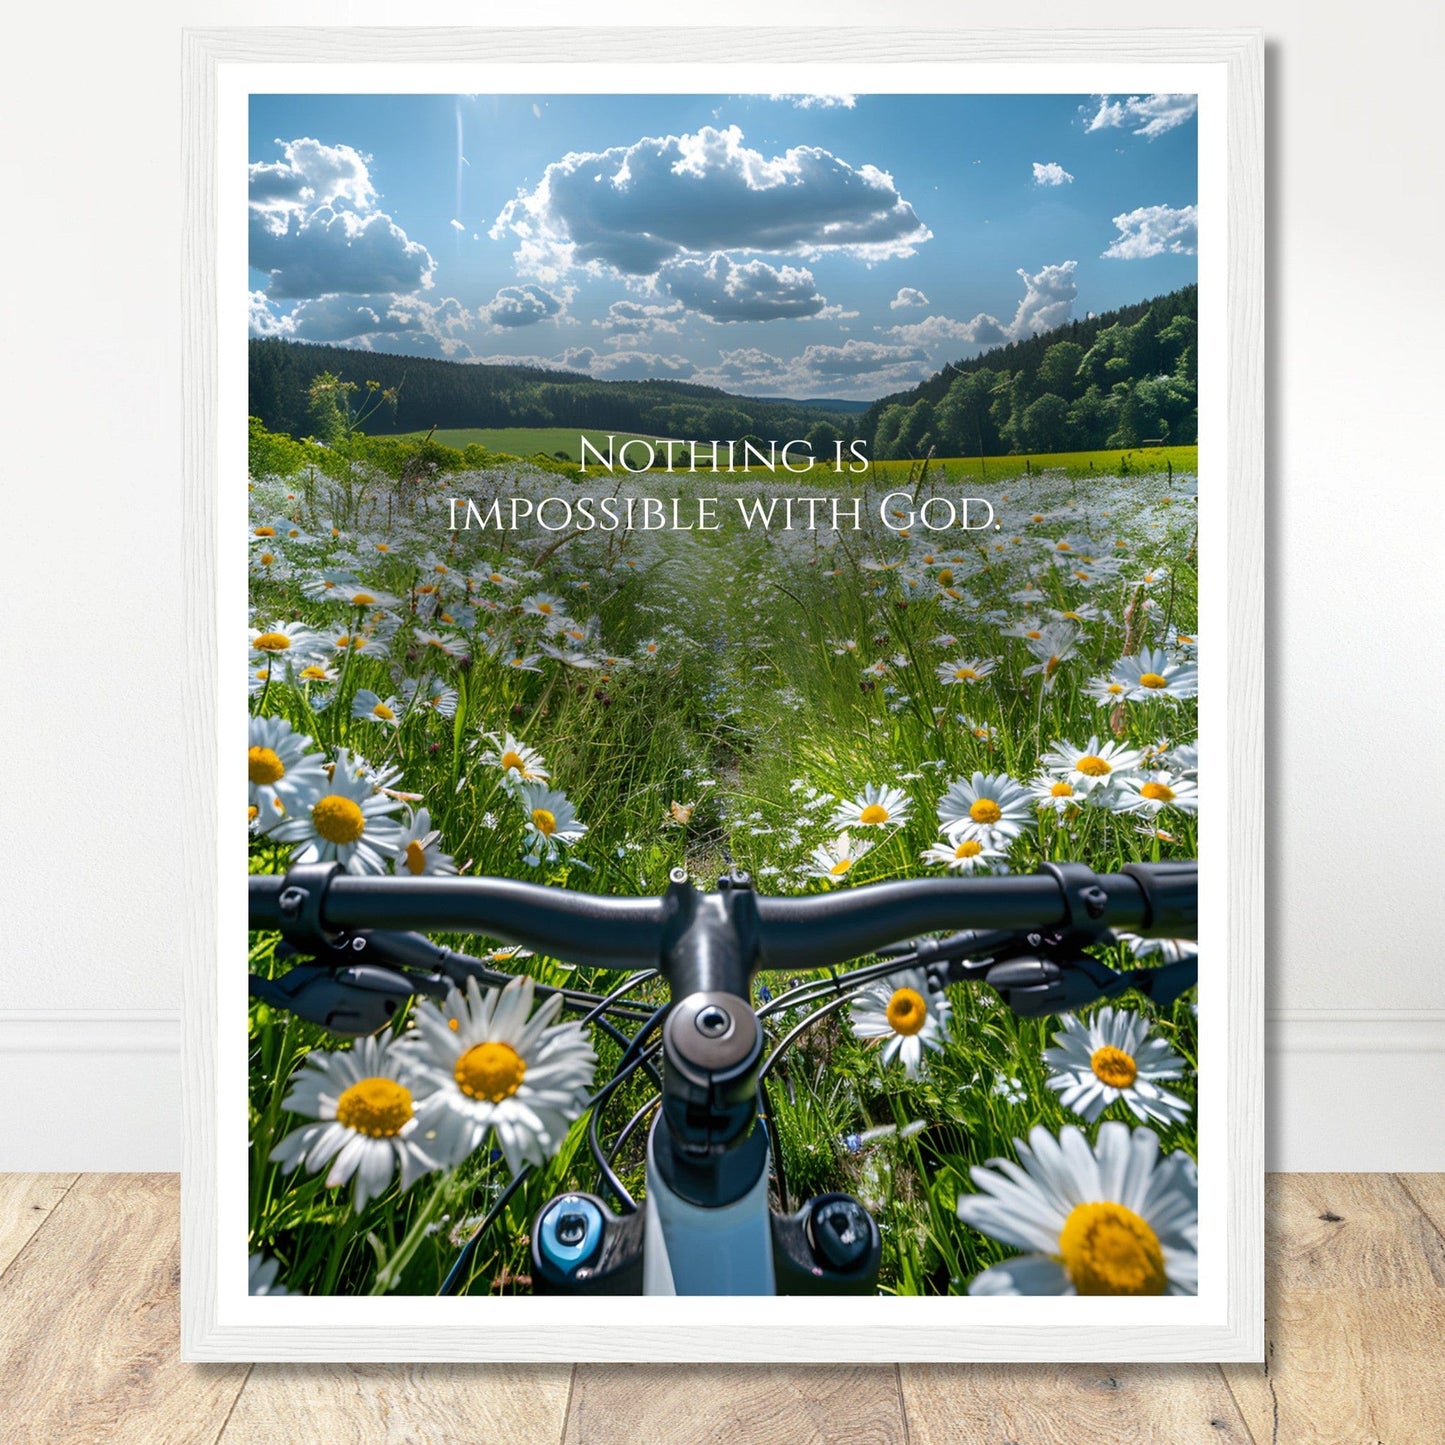 Coffee With My Father Print Material 40x50 cm / 16x20″ / Premium Matte Paper Wooden Framed Poster / White frame Nothing is Impossible With God - Artwork